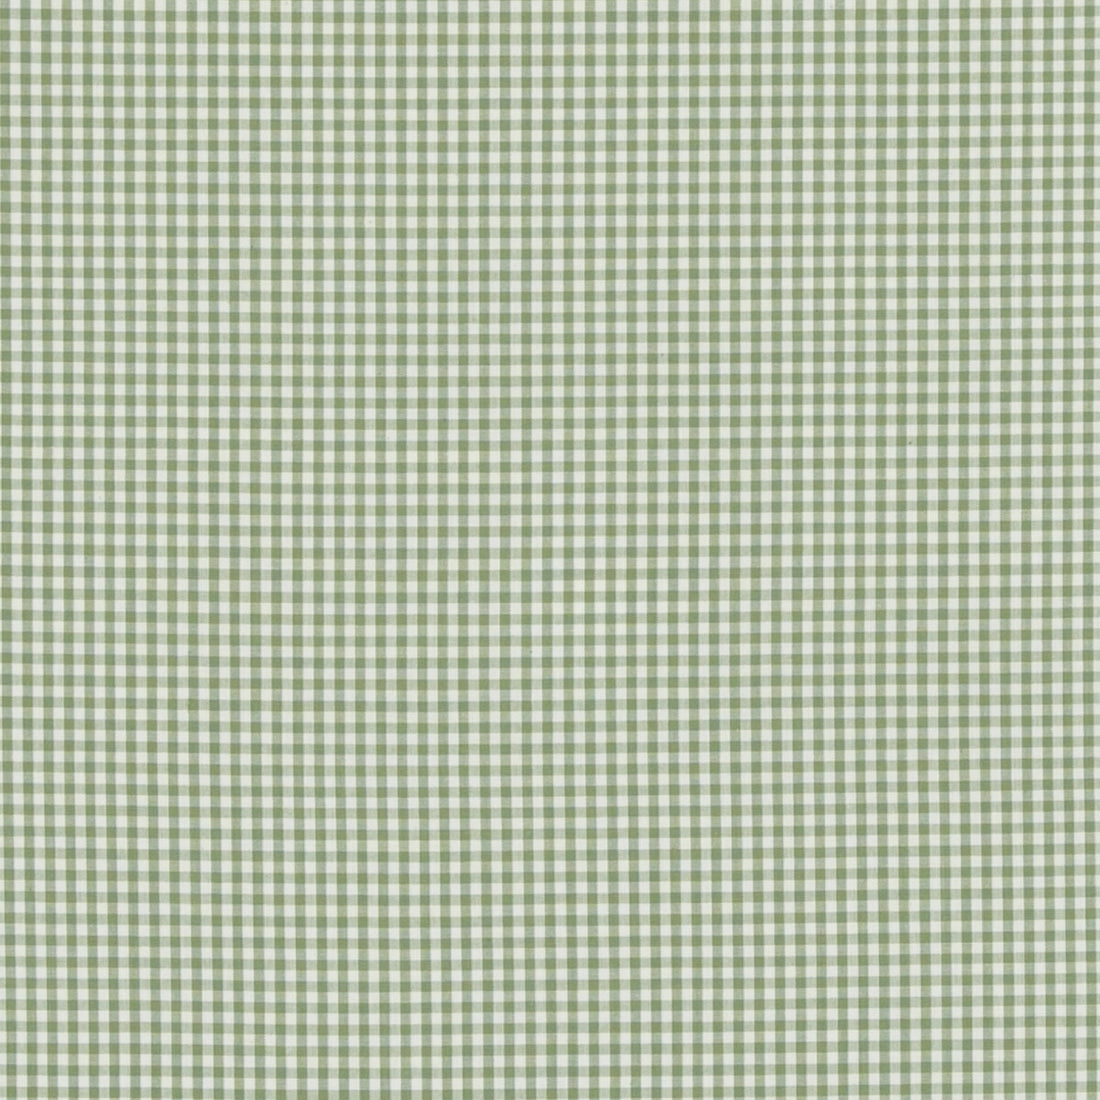 Sherborne Gingham fabric in green color - pattern PF50506.735.0 - by Baker Lifestyle in the Bridport collection